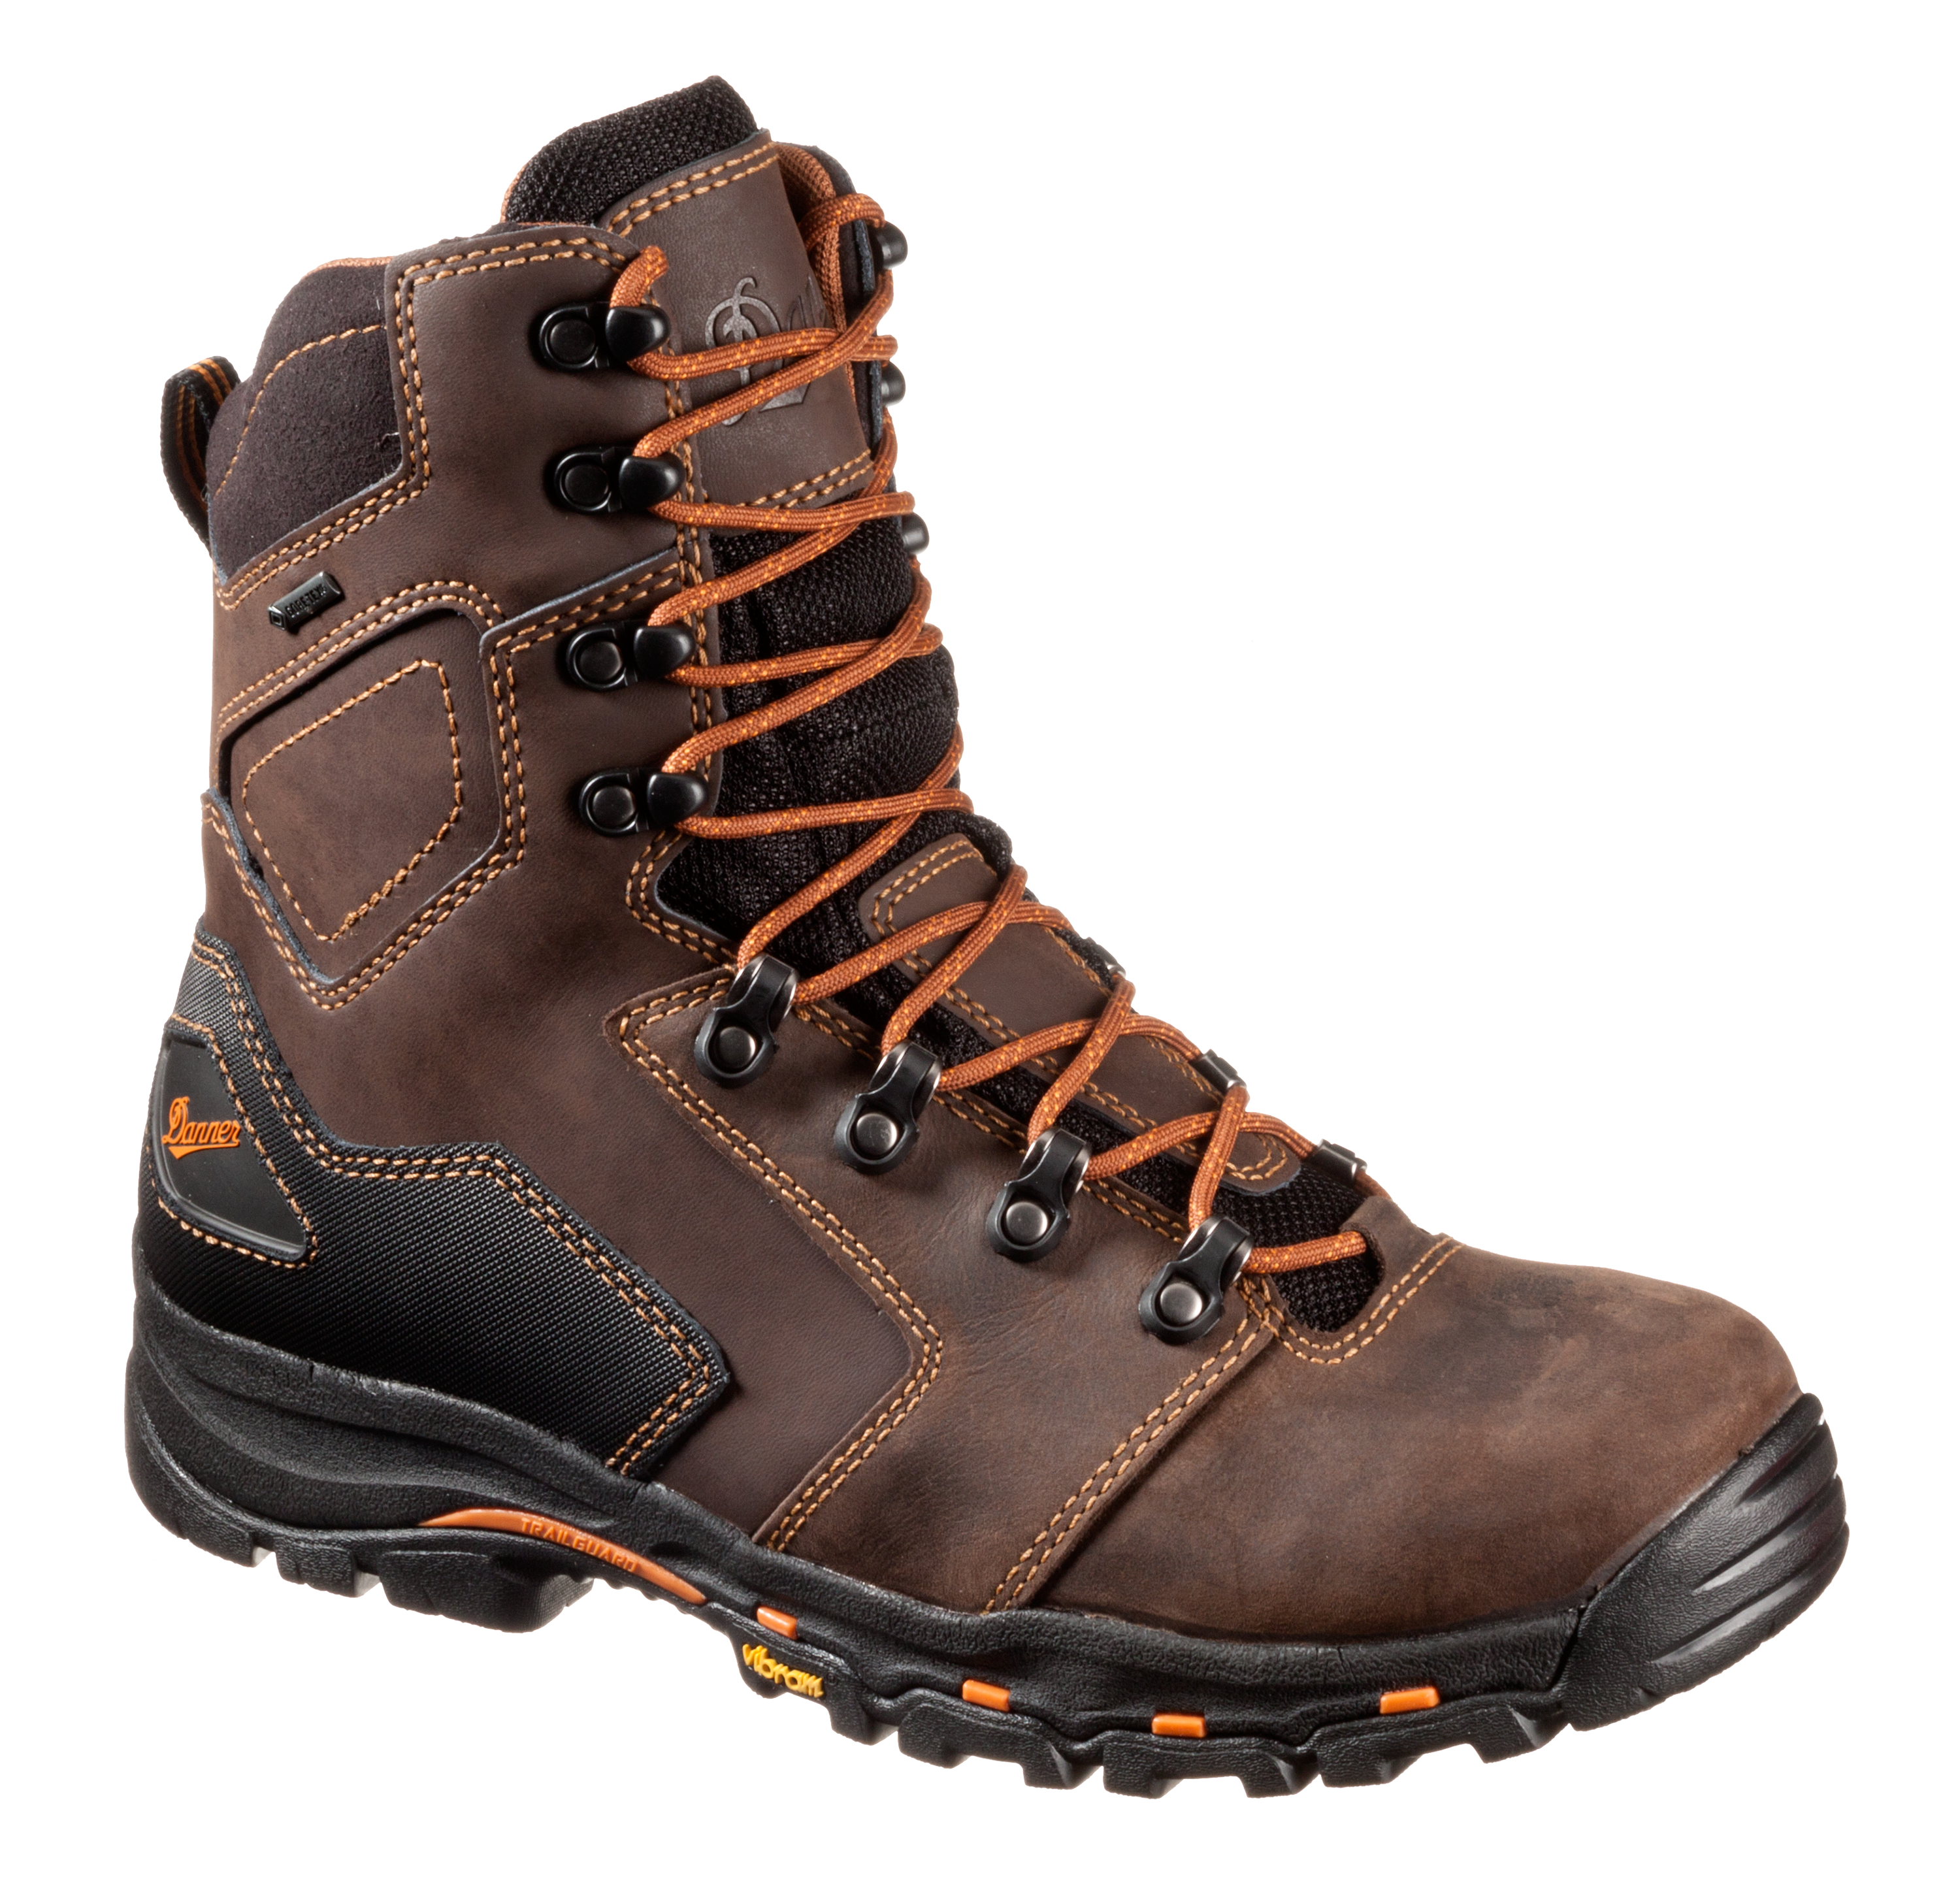 Danner Vicious GORE-TEX Work Boots for Men - Brown - 9.5 W